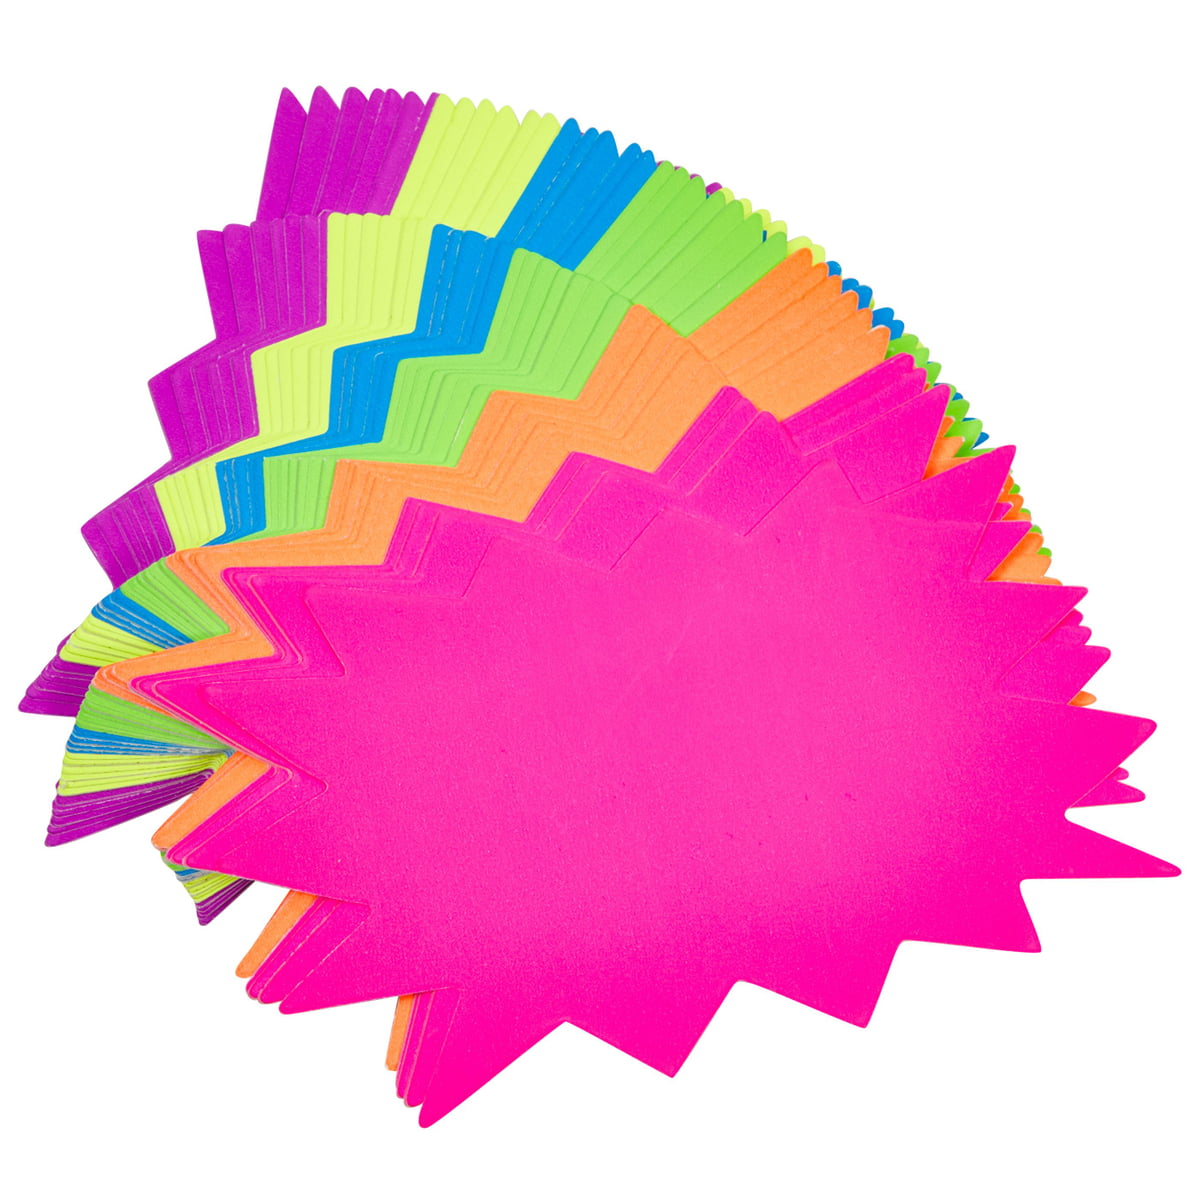 4 Bright Colors 100 Pieces Fluorescent Signs Starburst Signs Burst Paper Signs for Retail Store Party Favors 4.1 x 5.5 Inches 